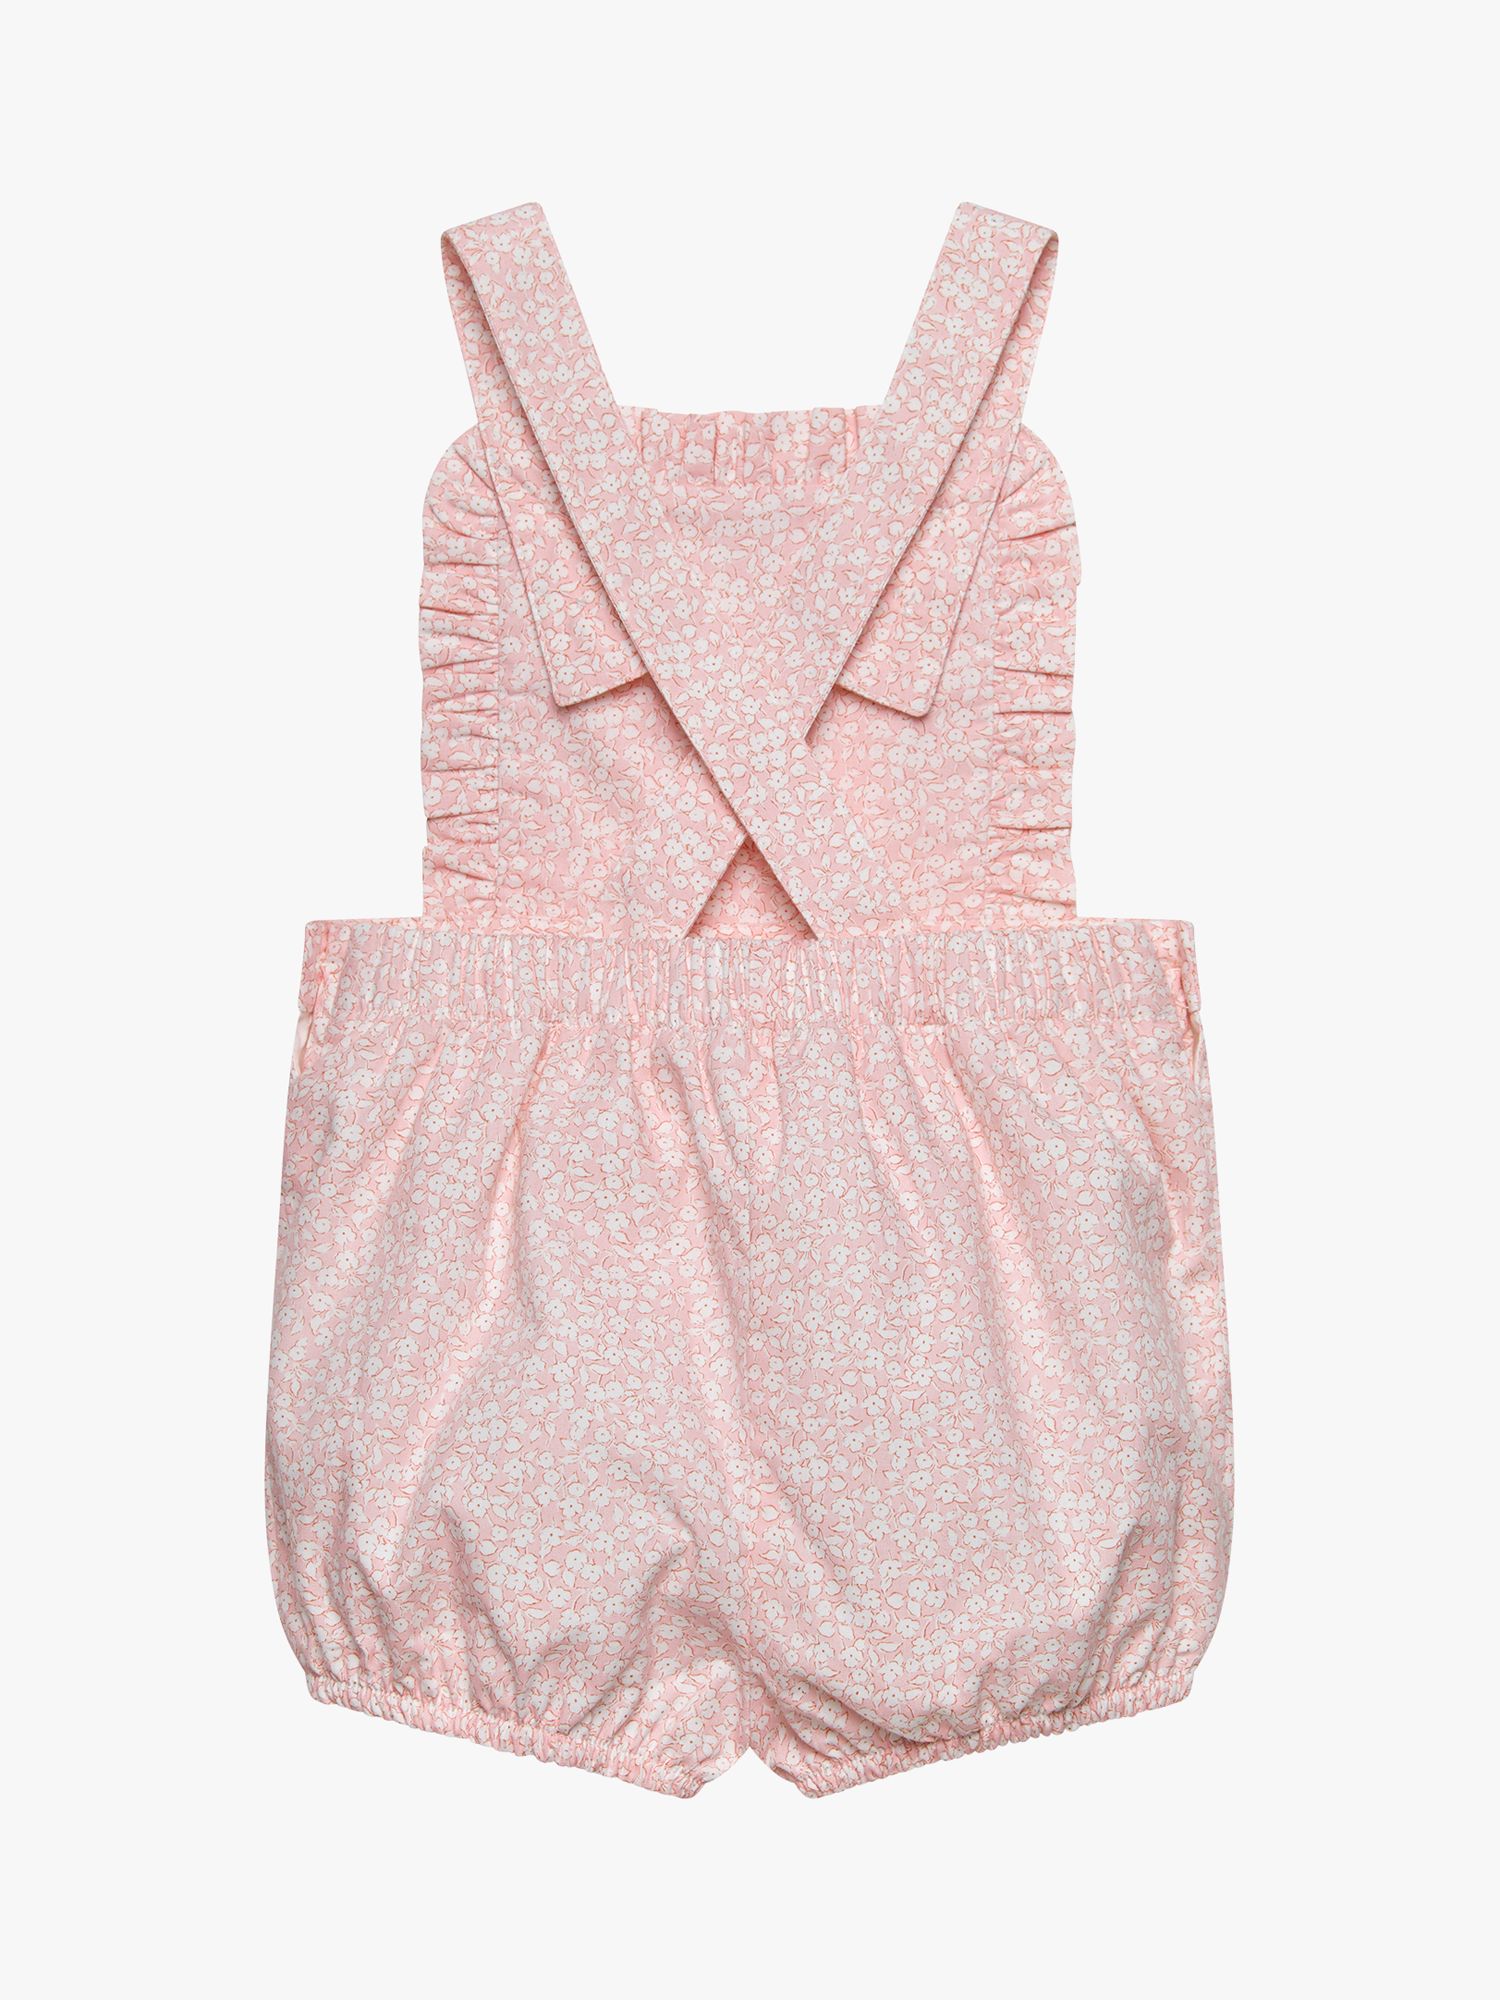 Buy Trotters Baby Bunny Frill Floral Print Bib Shorts, Pink./White Online at johnlewis.com